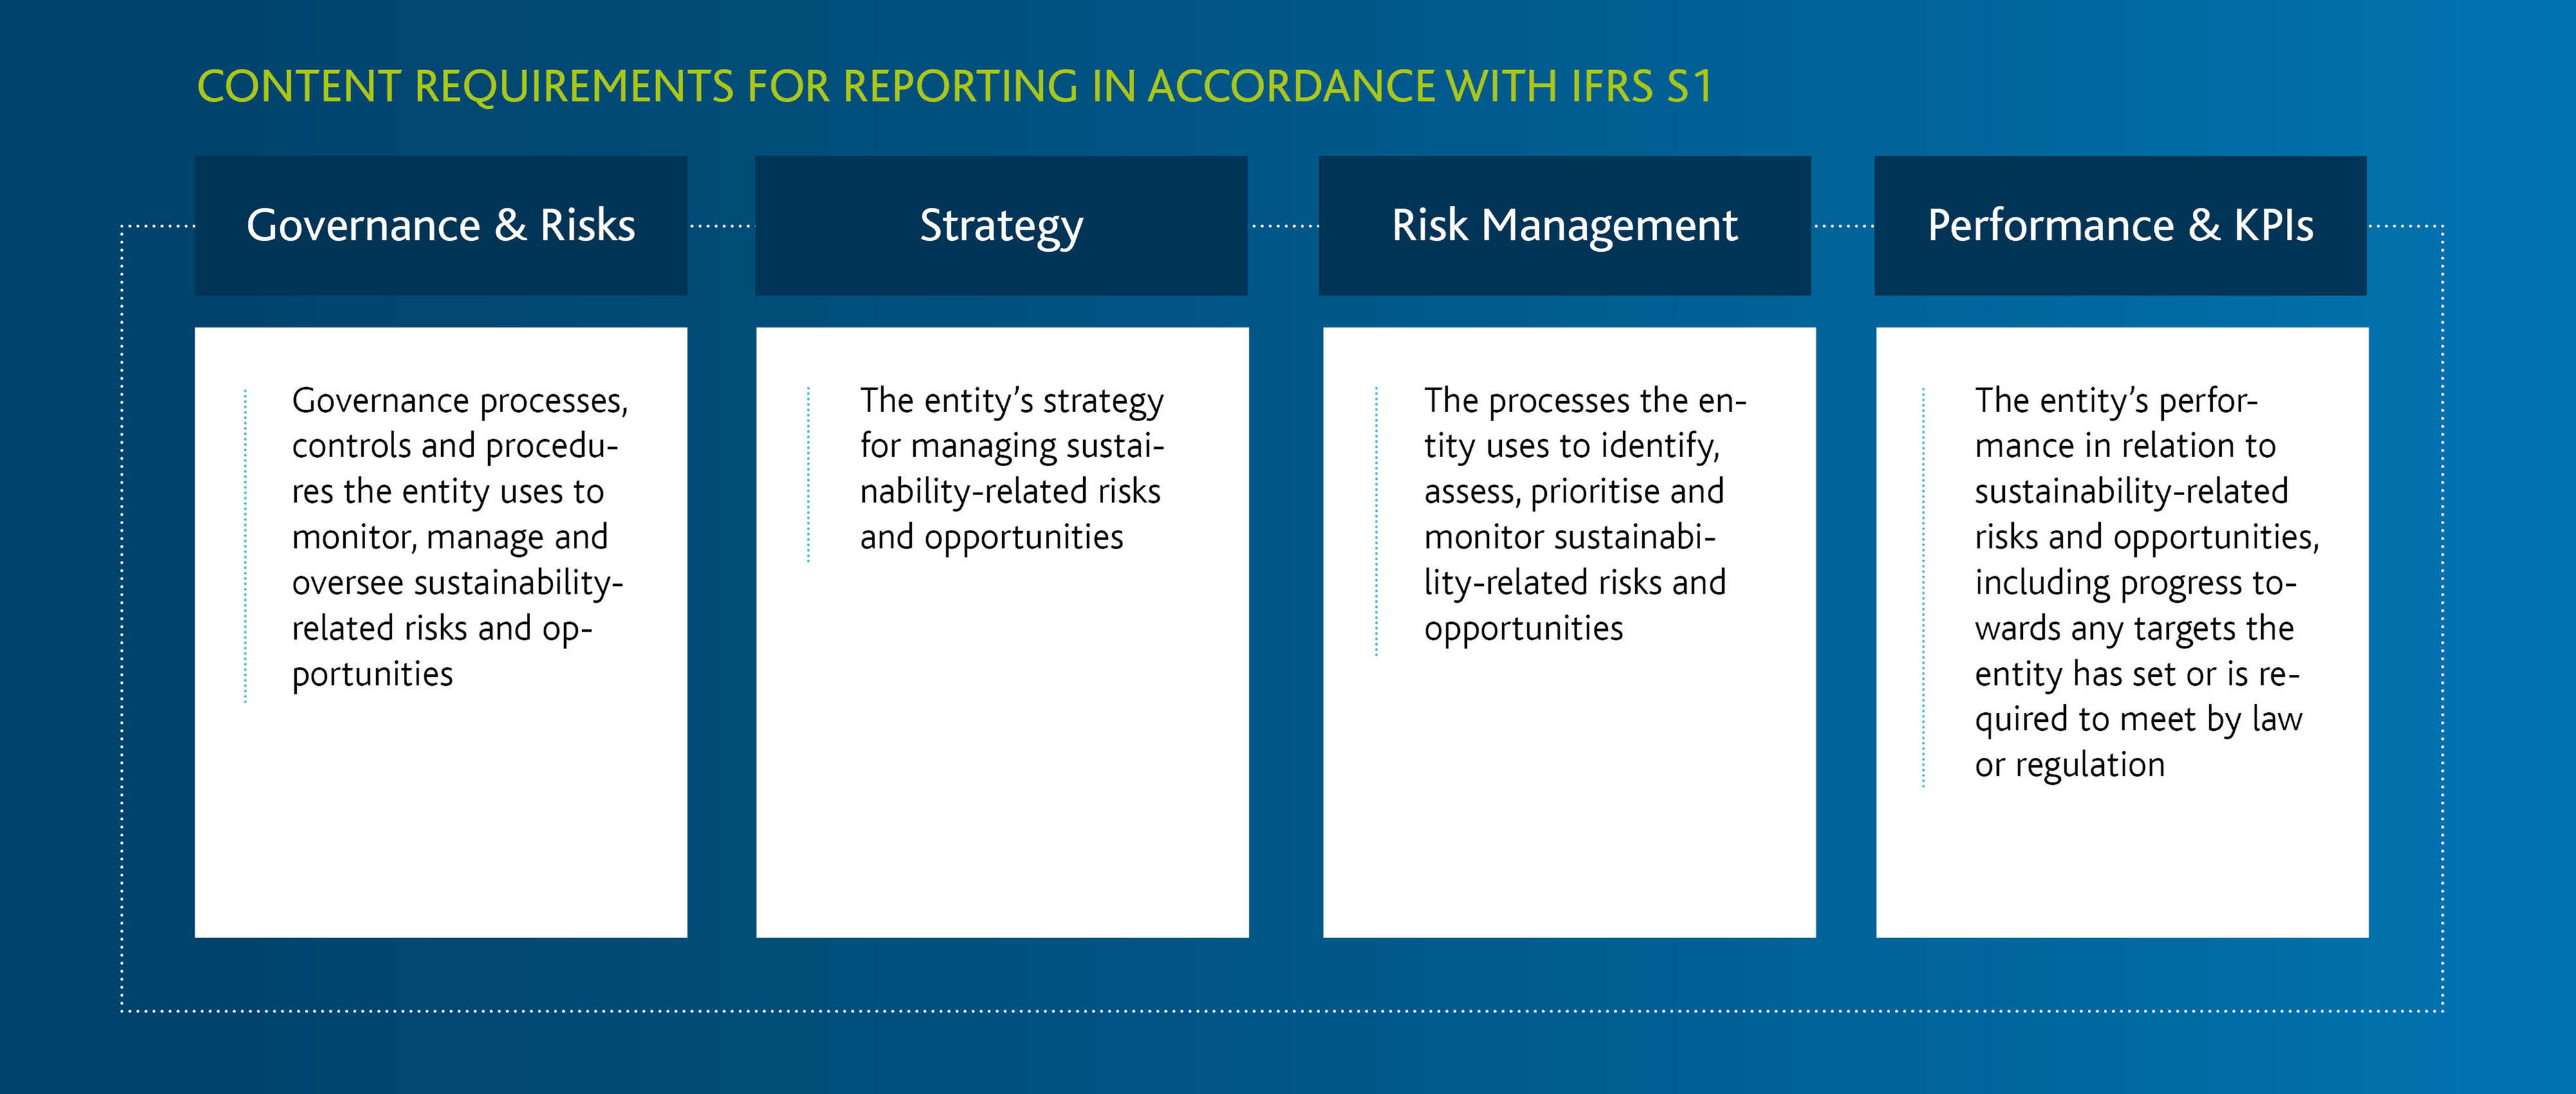 Figure 1 - Content requirements for reporting according to IFRS S1